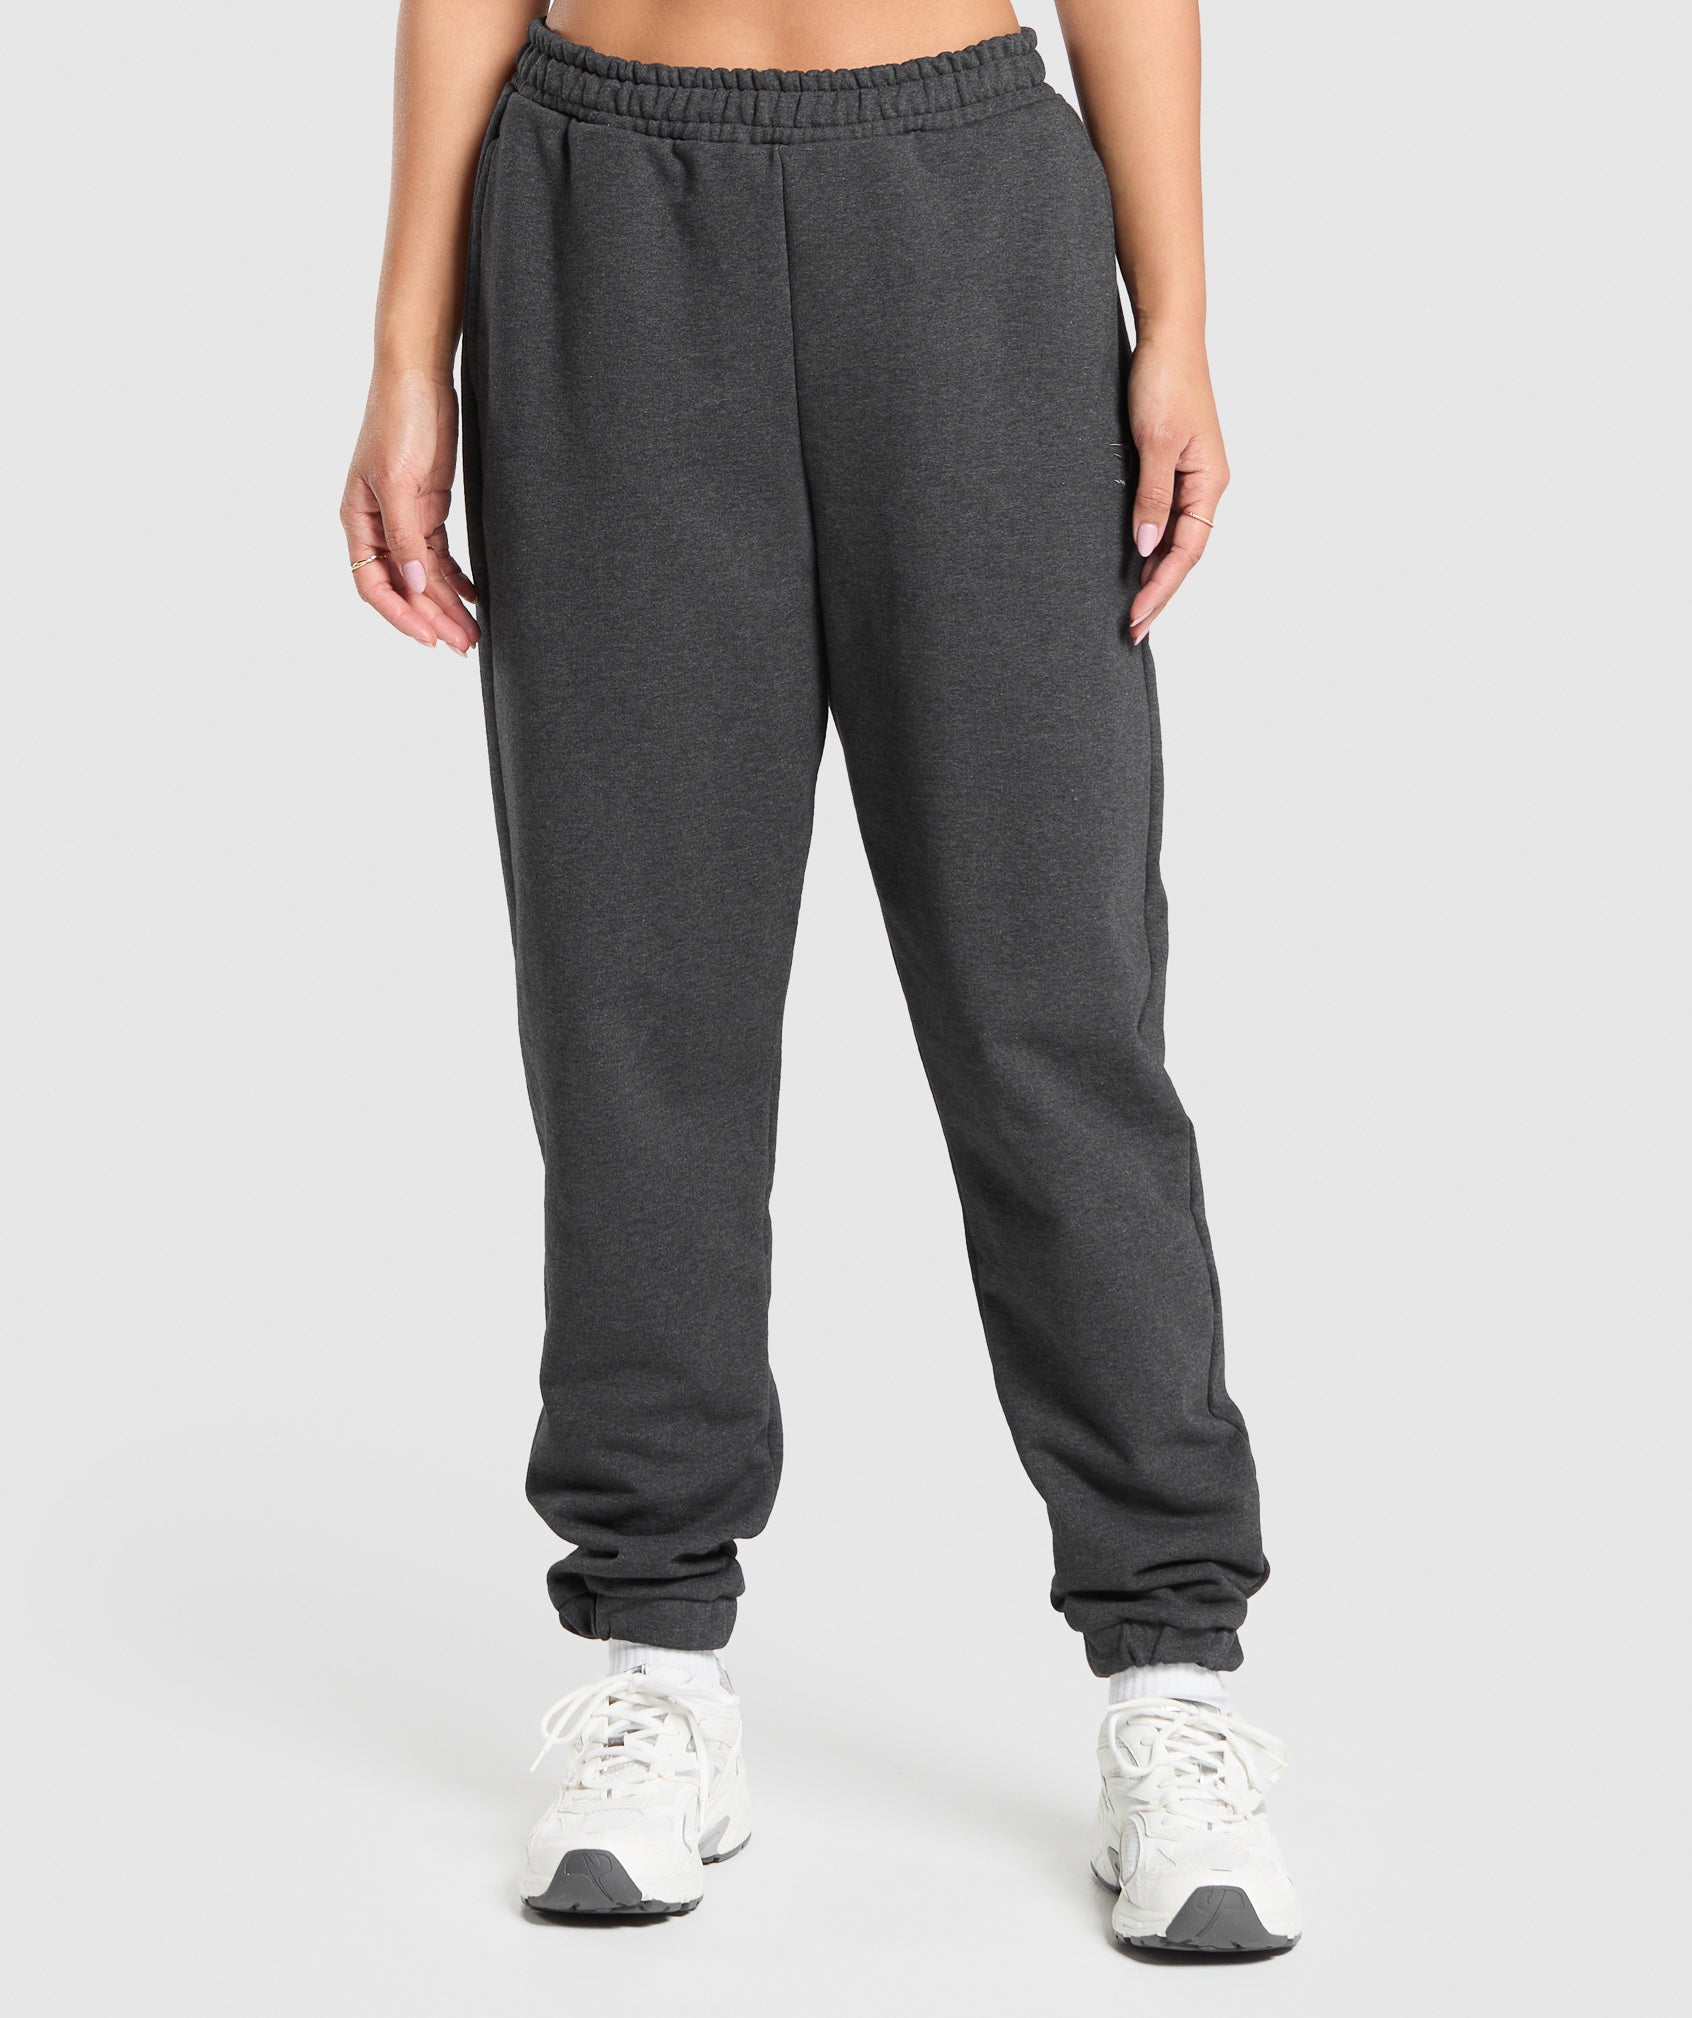 Rest Day Sweats Joggers